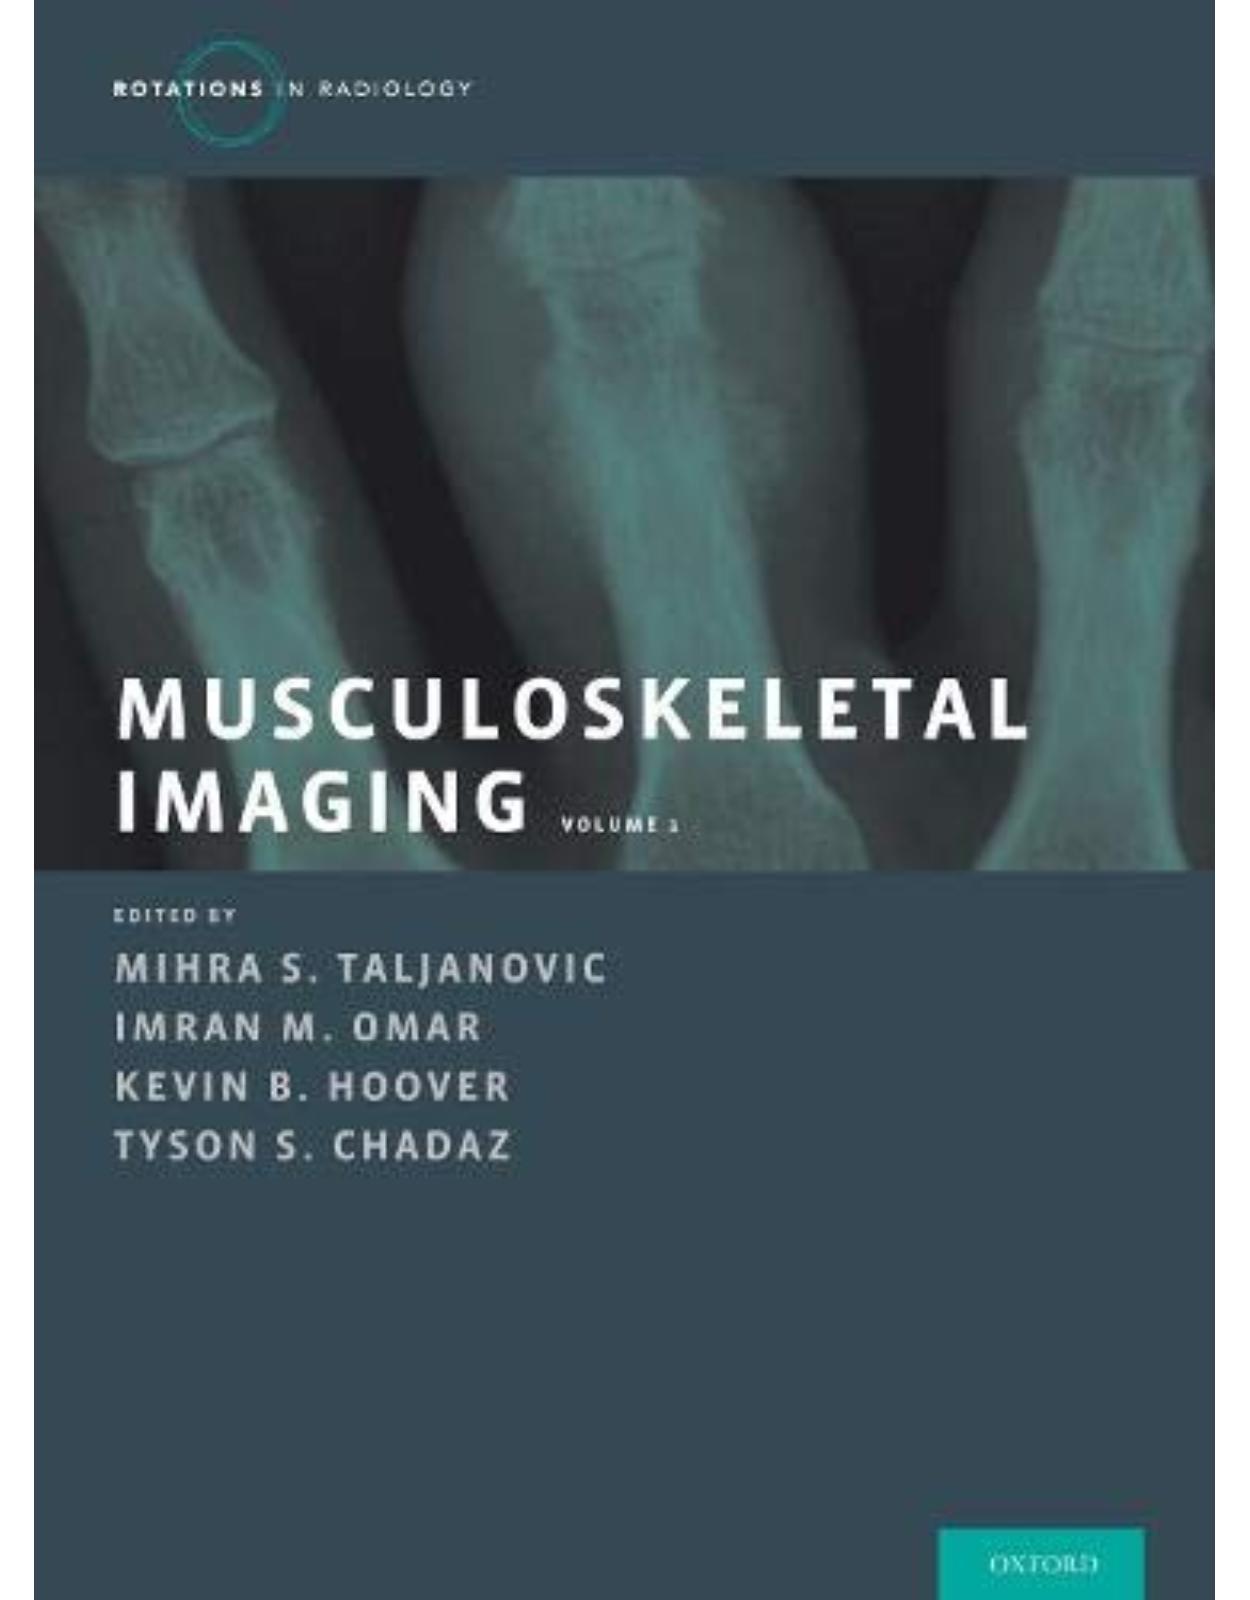 Musculoskeletal Imaging Volume 1: Trauma, Arthritis, and Tumor and Tumor-Like Conditions (Rotations in Radiology)